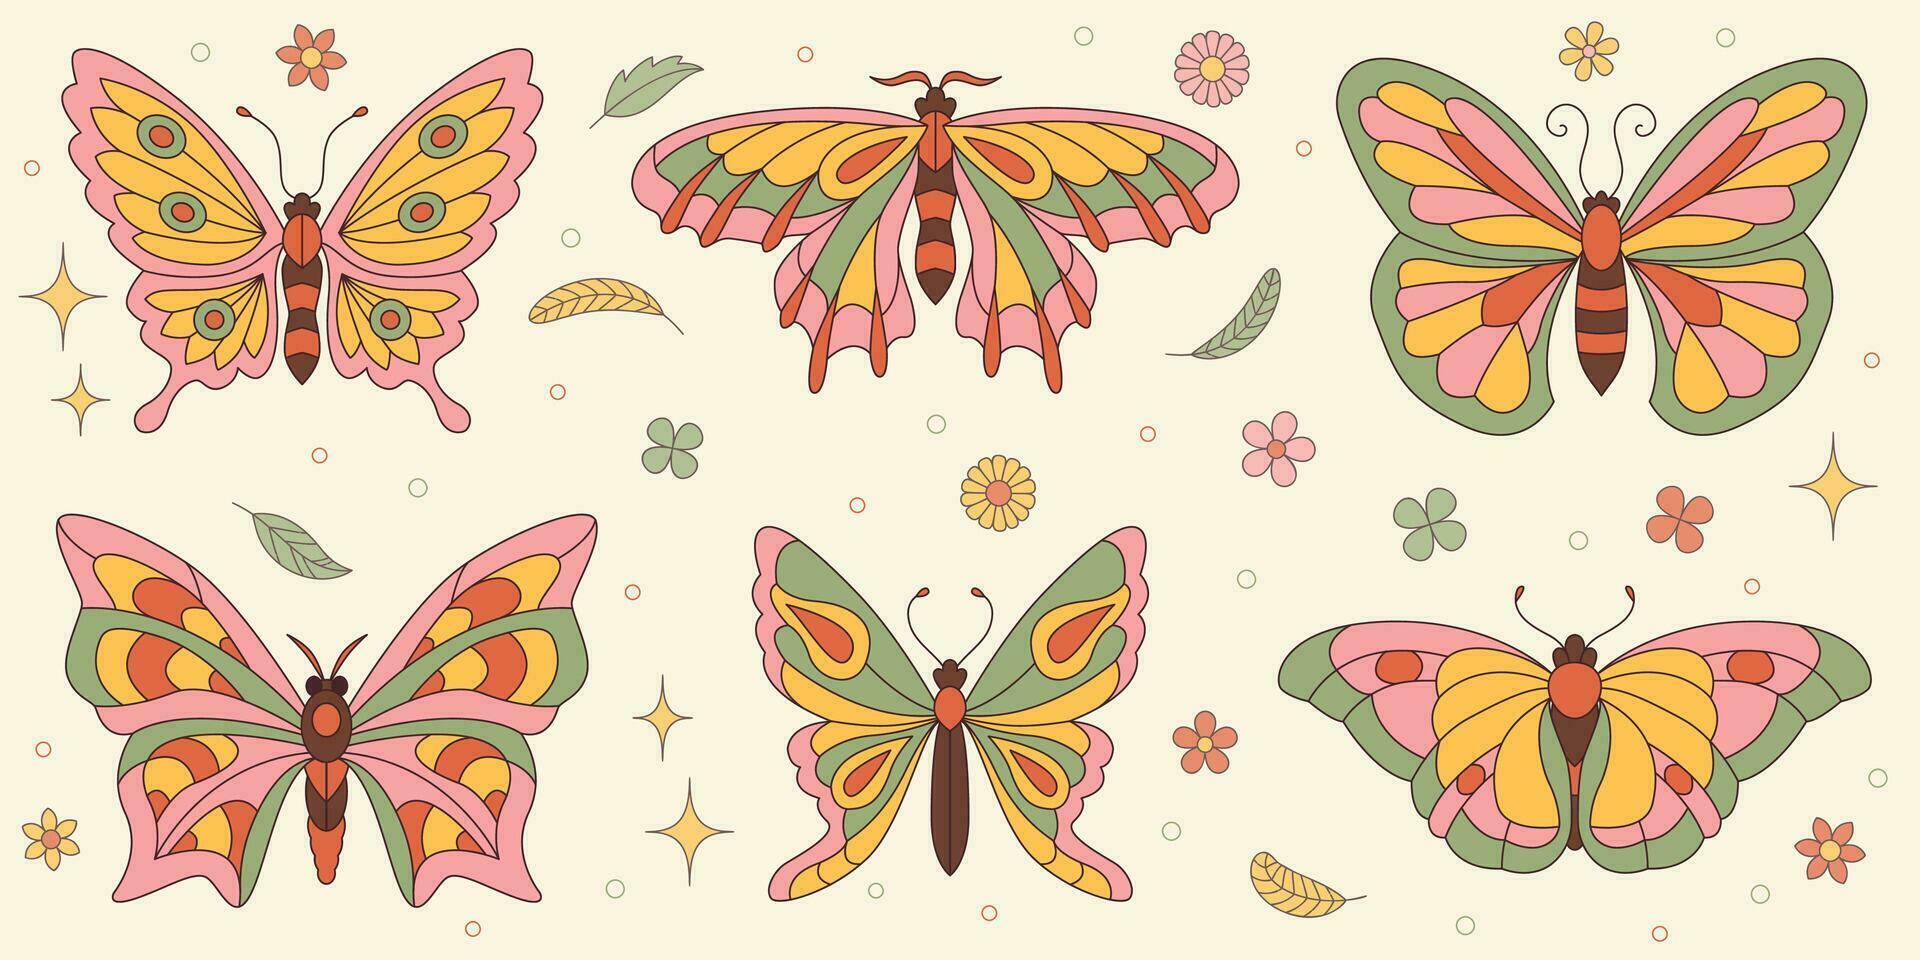 Groovy butterfly stickers set. Hippie 60s 70s retro style. Yellow, pink green colors. vector